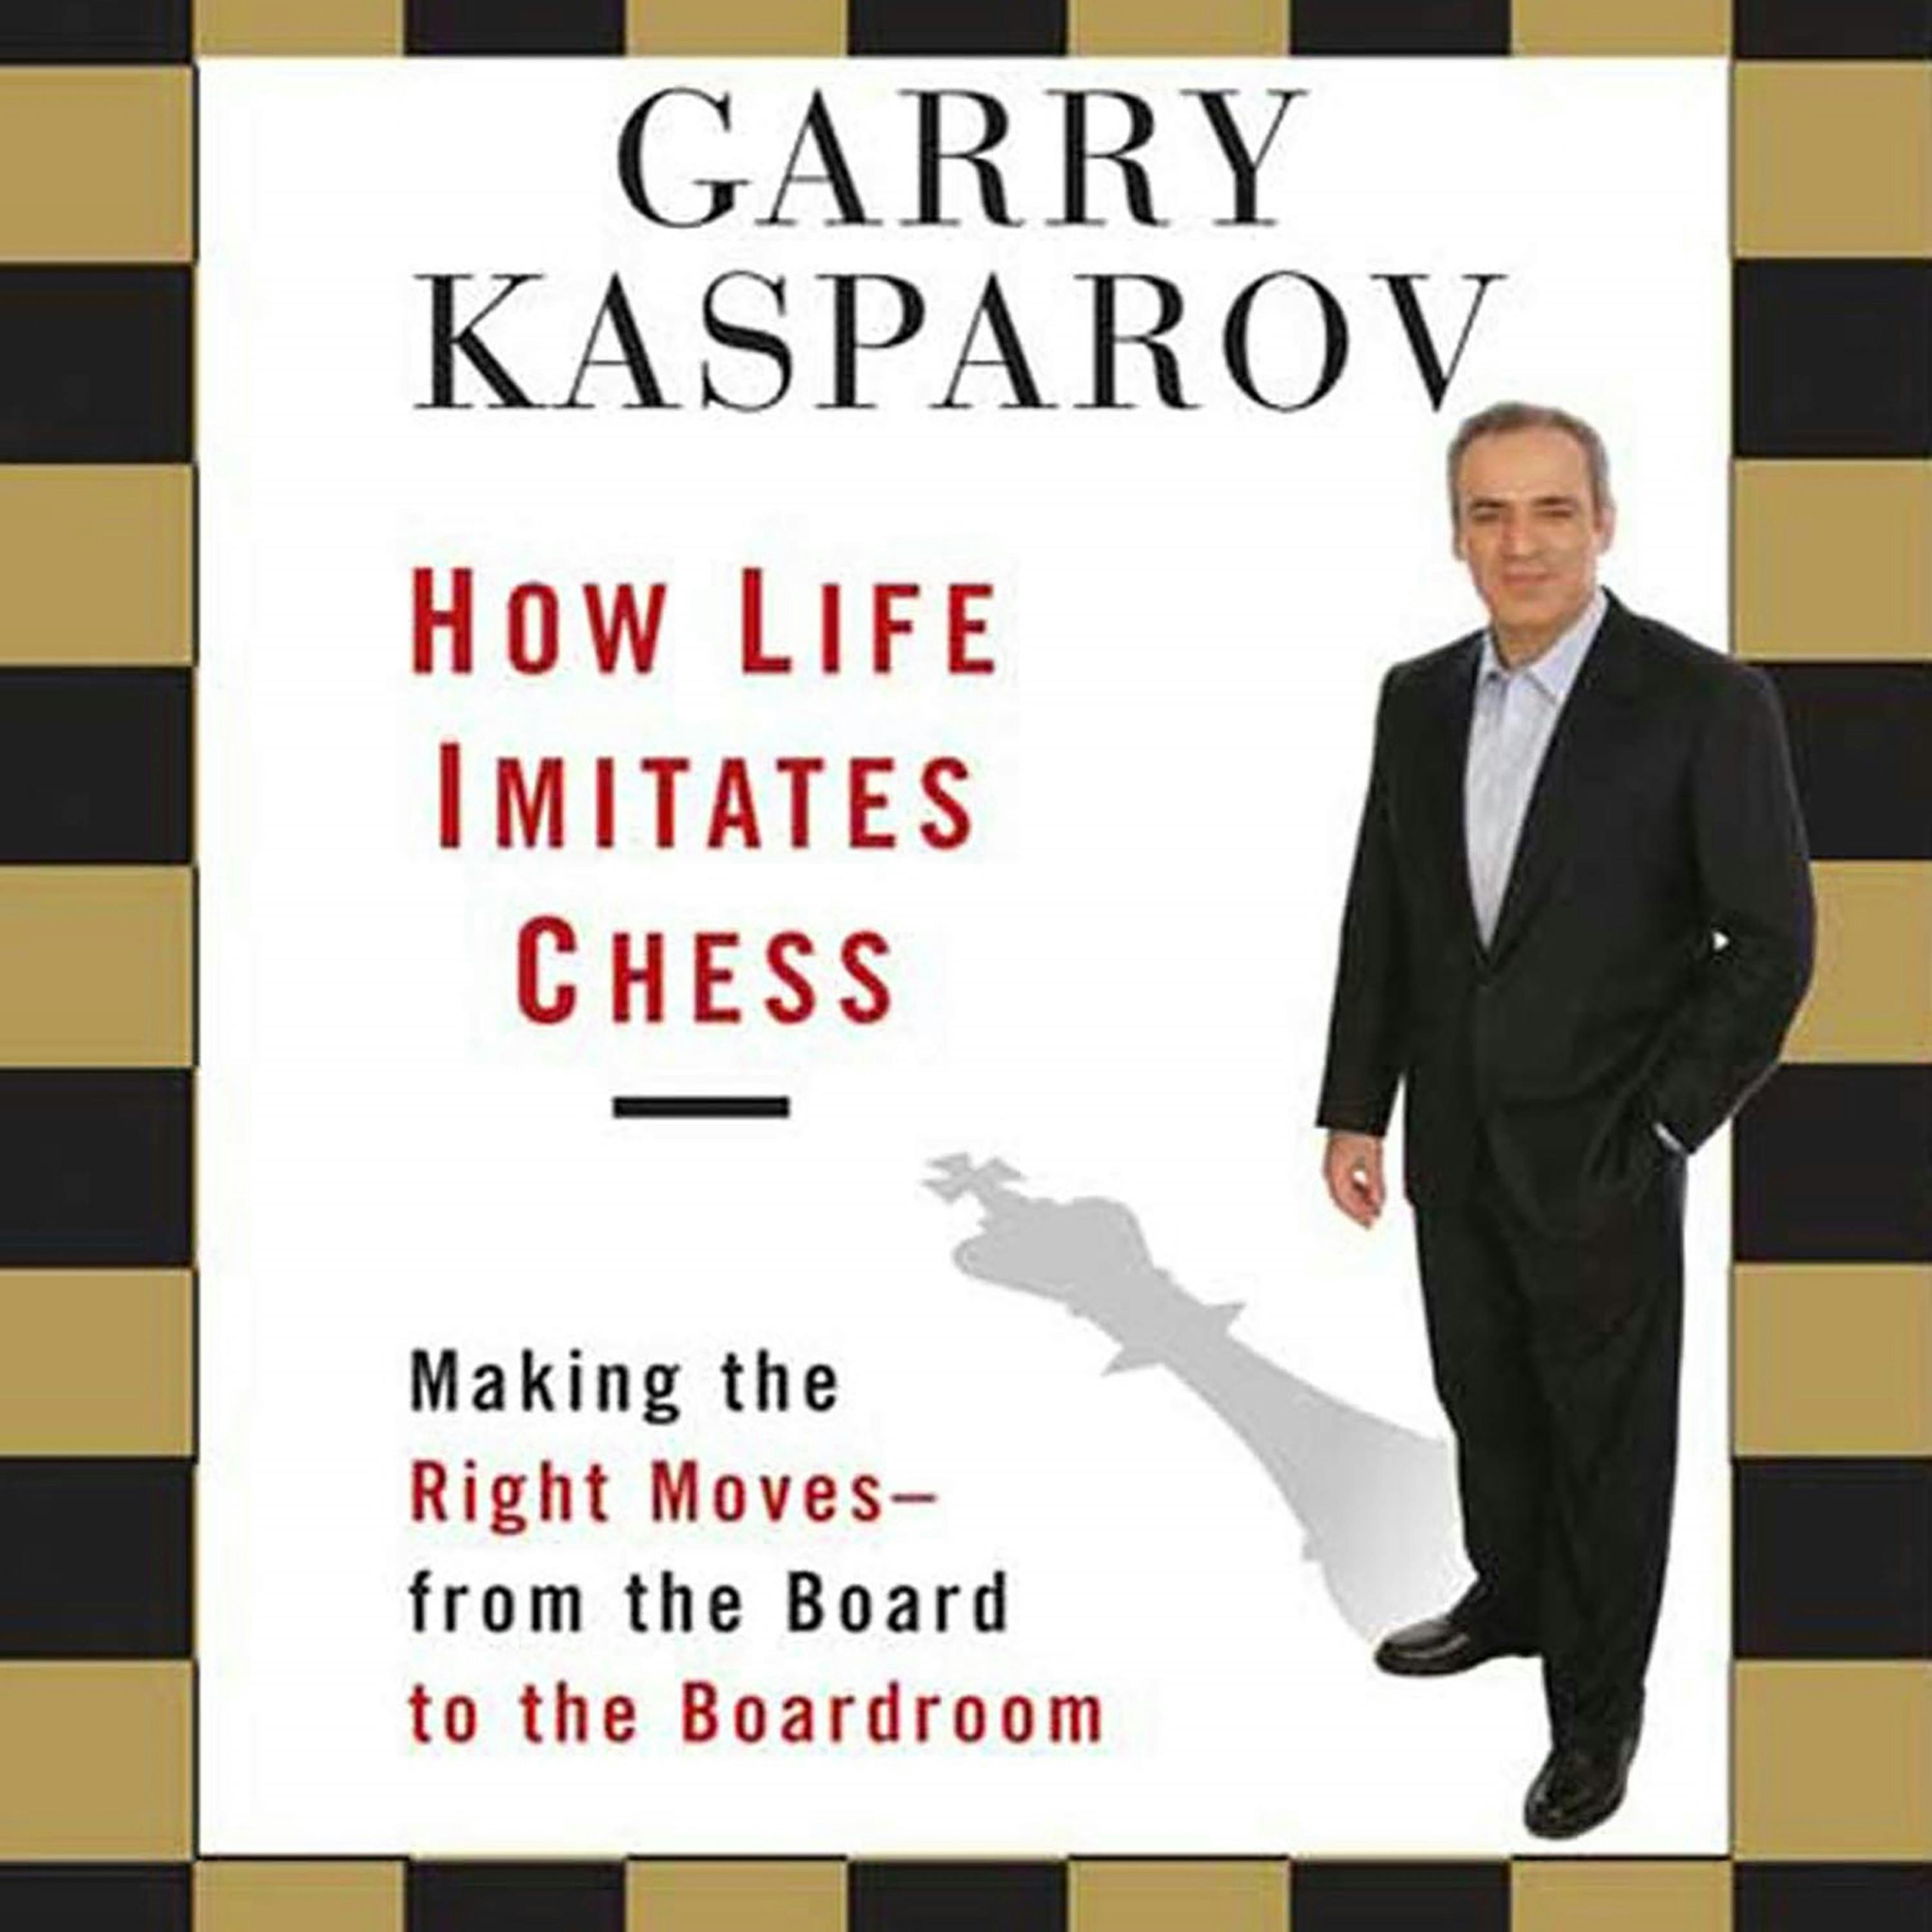 A universal history of infamy in chess